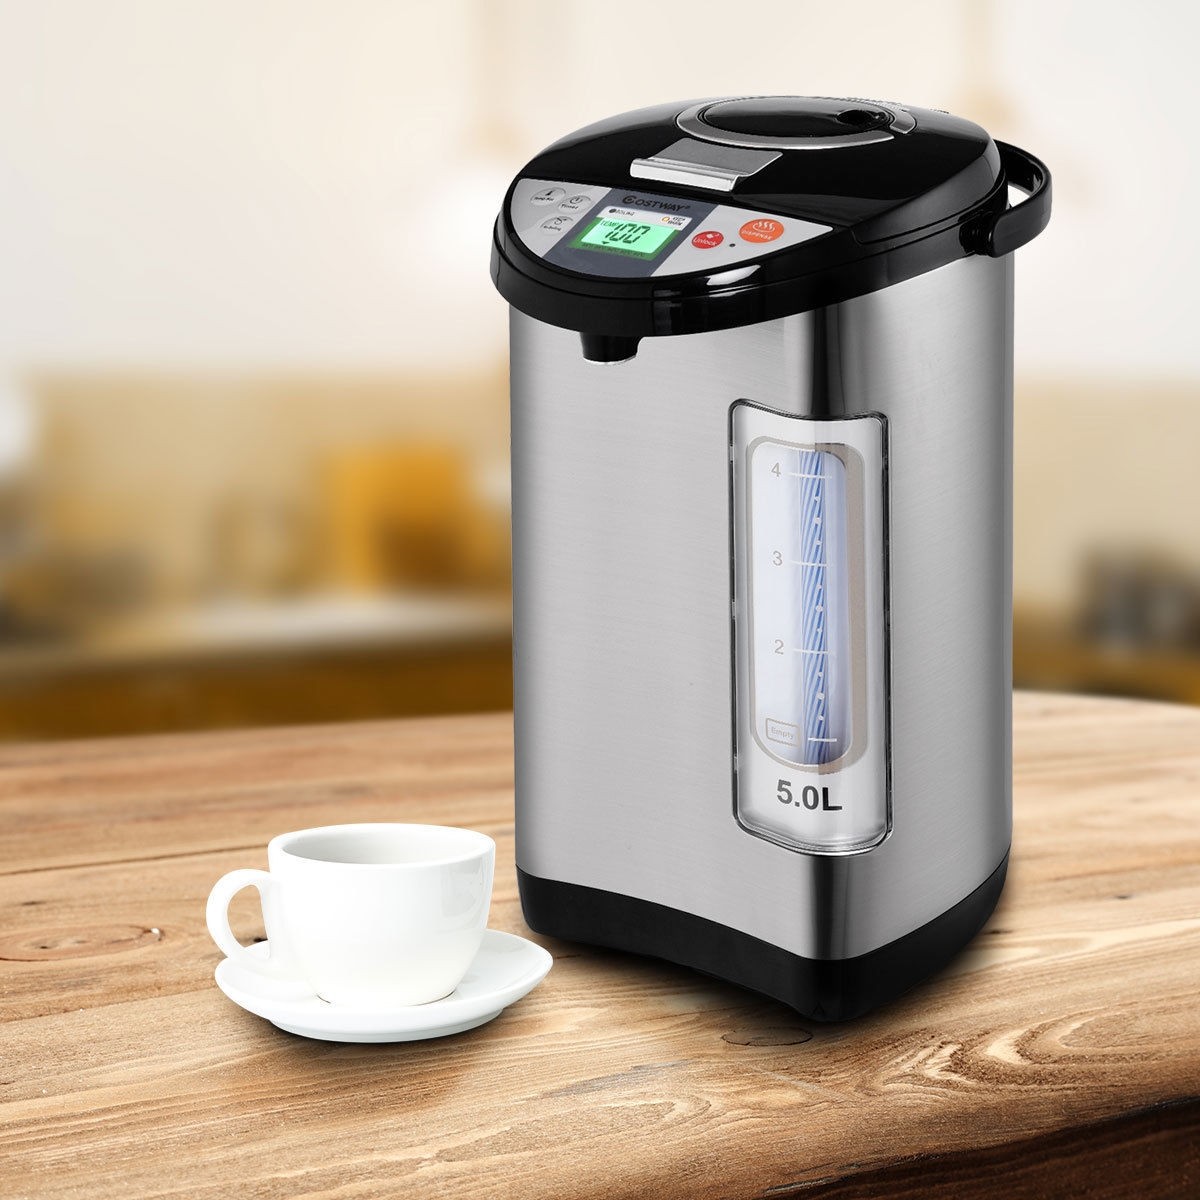 https://www.momjunction.com/wp-content/uploads/product-images/cost-way-instant-electric-hot-water-boiler-and-warmer_afl1310.jpg